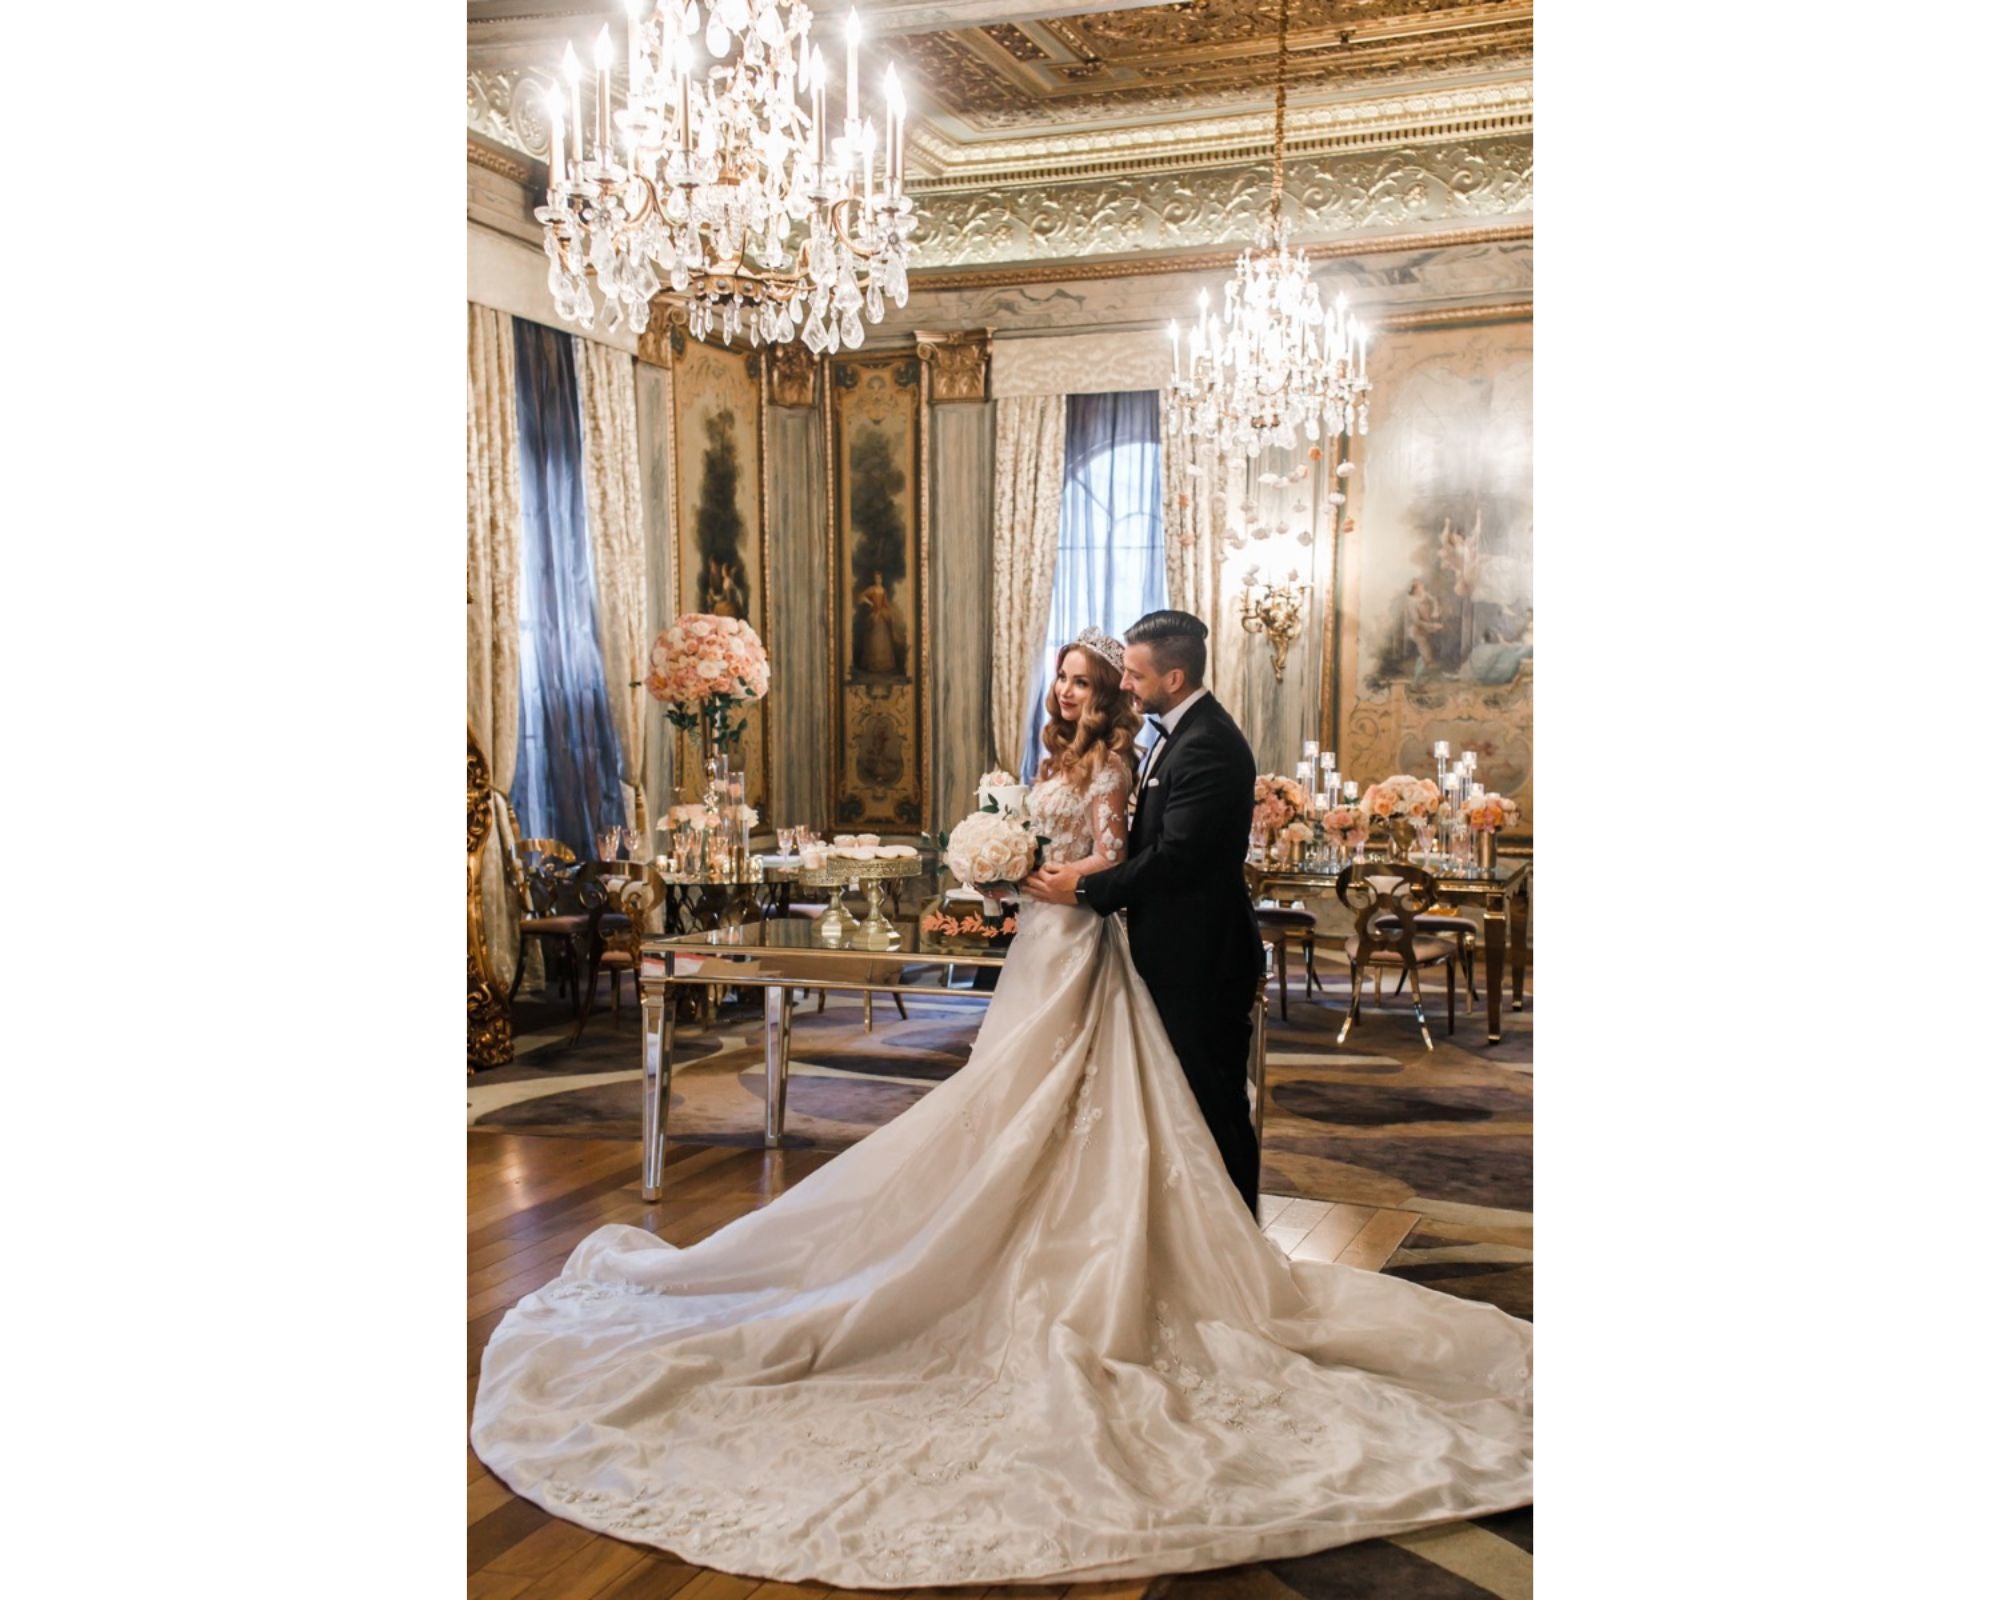 Marie Antoinette-inspired bridal style! This shoot features glam, lavish wedding and bridal style ideas, like this regal bride wearing a fabulous wedding gown with a full train from Bridal Reflections NY and Swarovski crystal bridal tiara from Bridal Styles Boutique.  Photography by Artvesta Studio. 